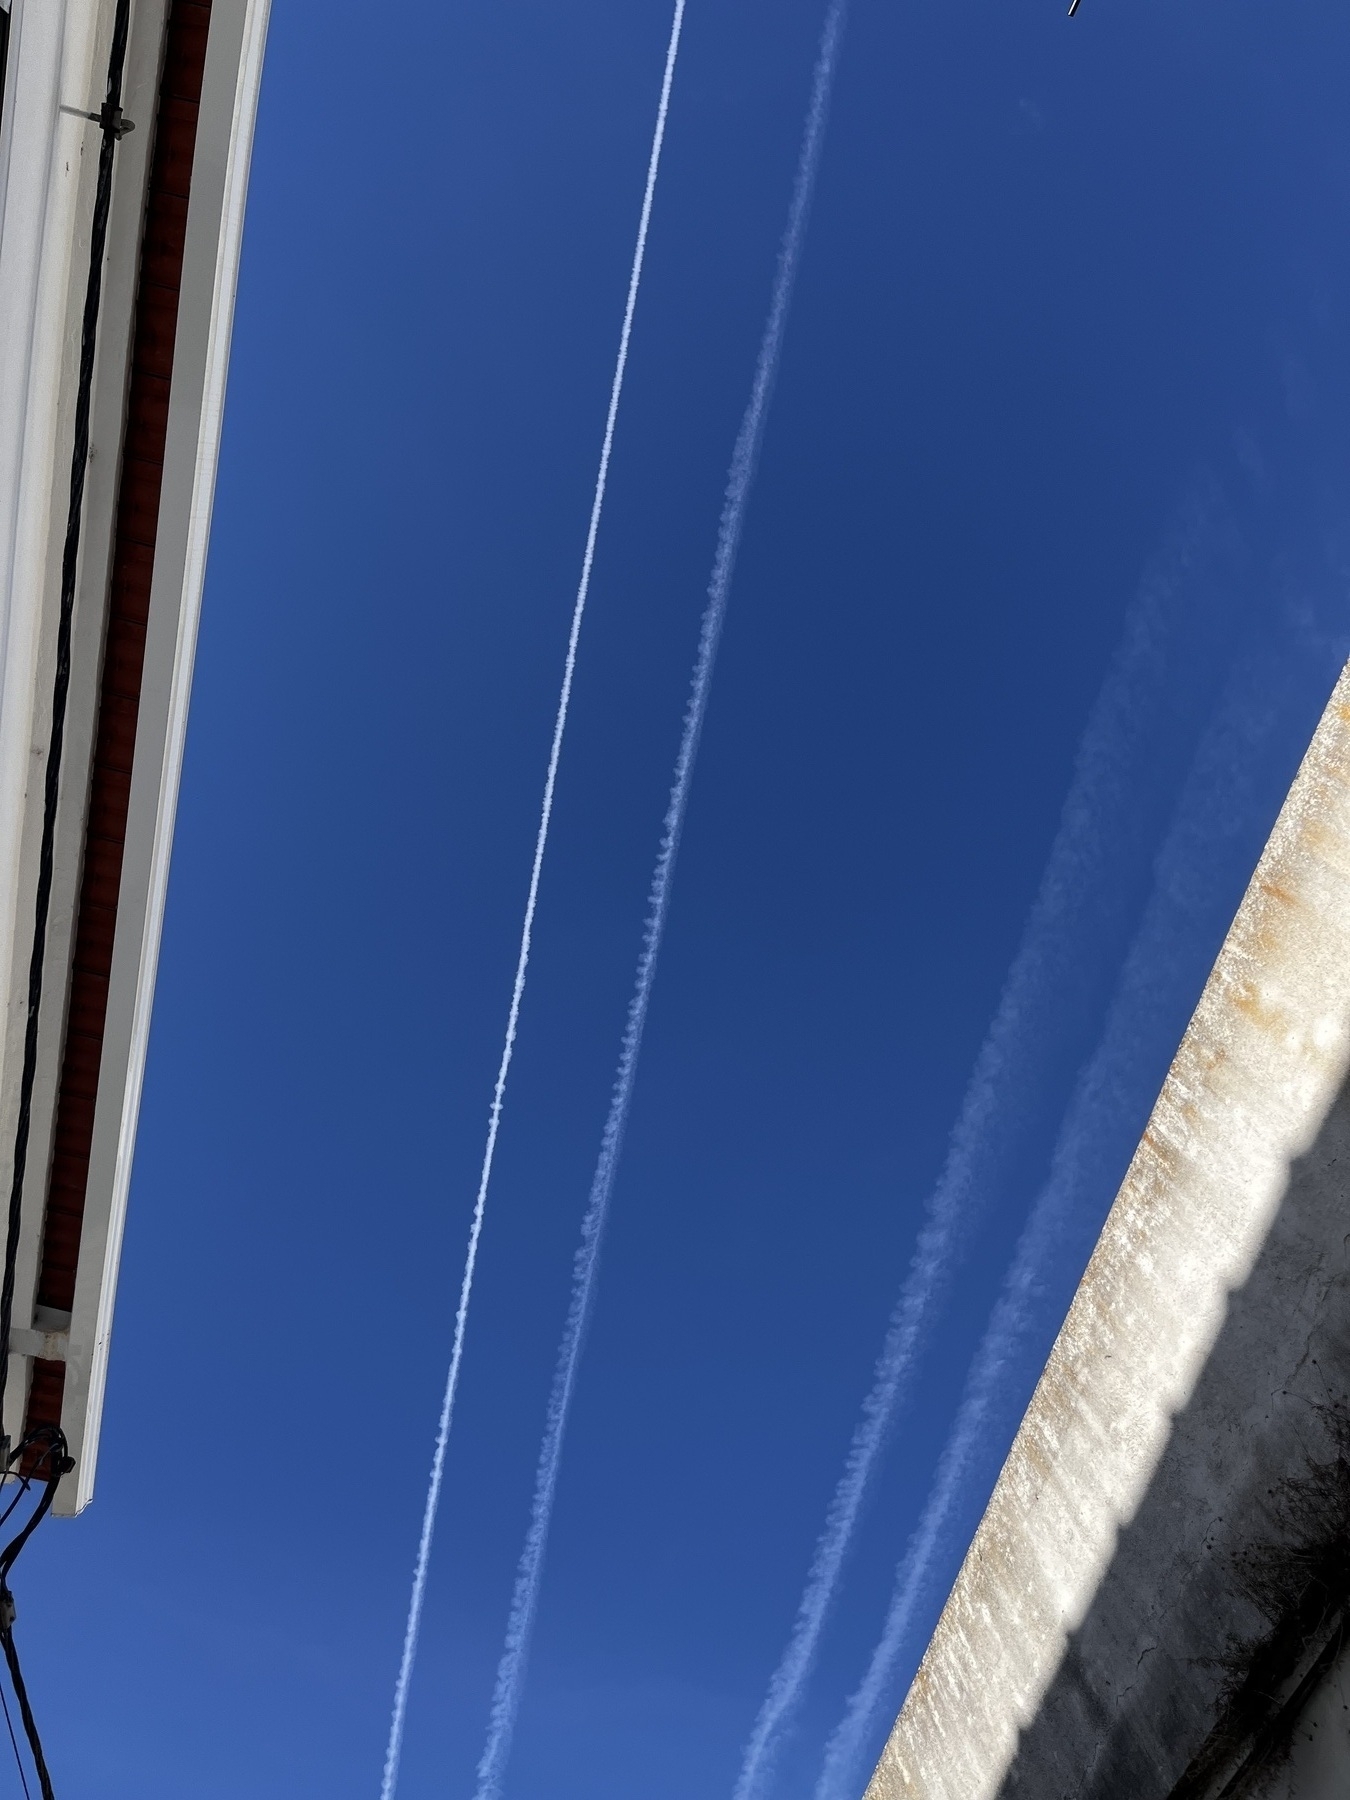 Parallel Contrails against blue sky with the edge of roof tops on both sides of the image